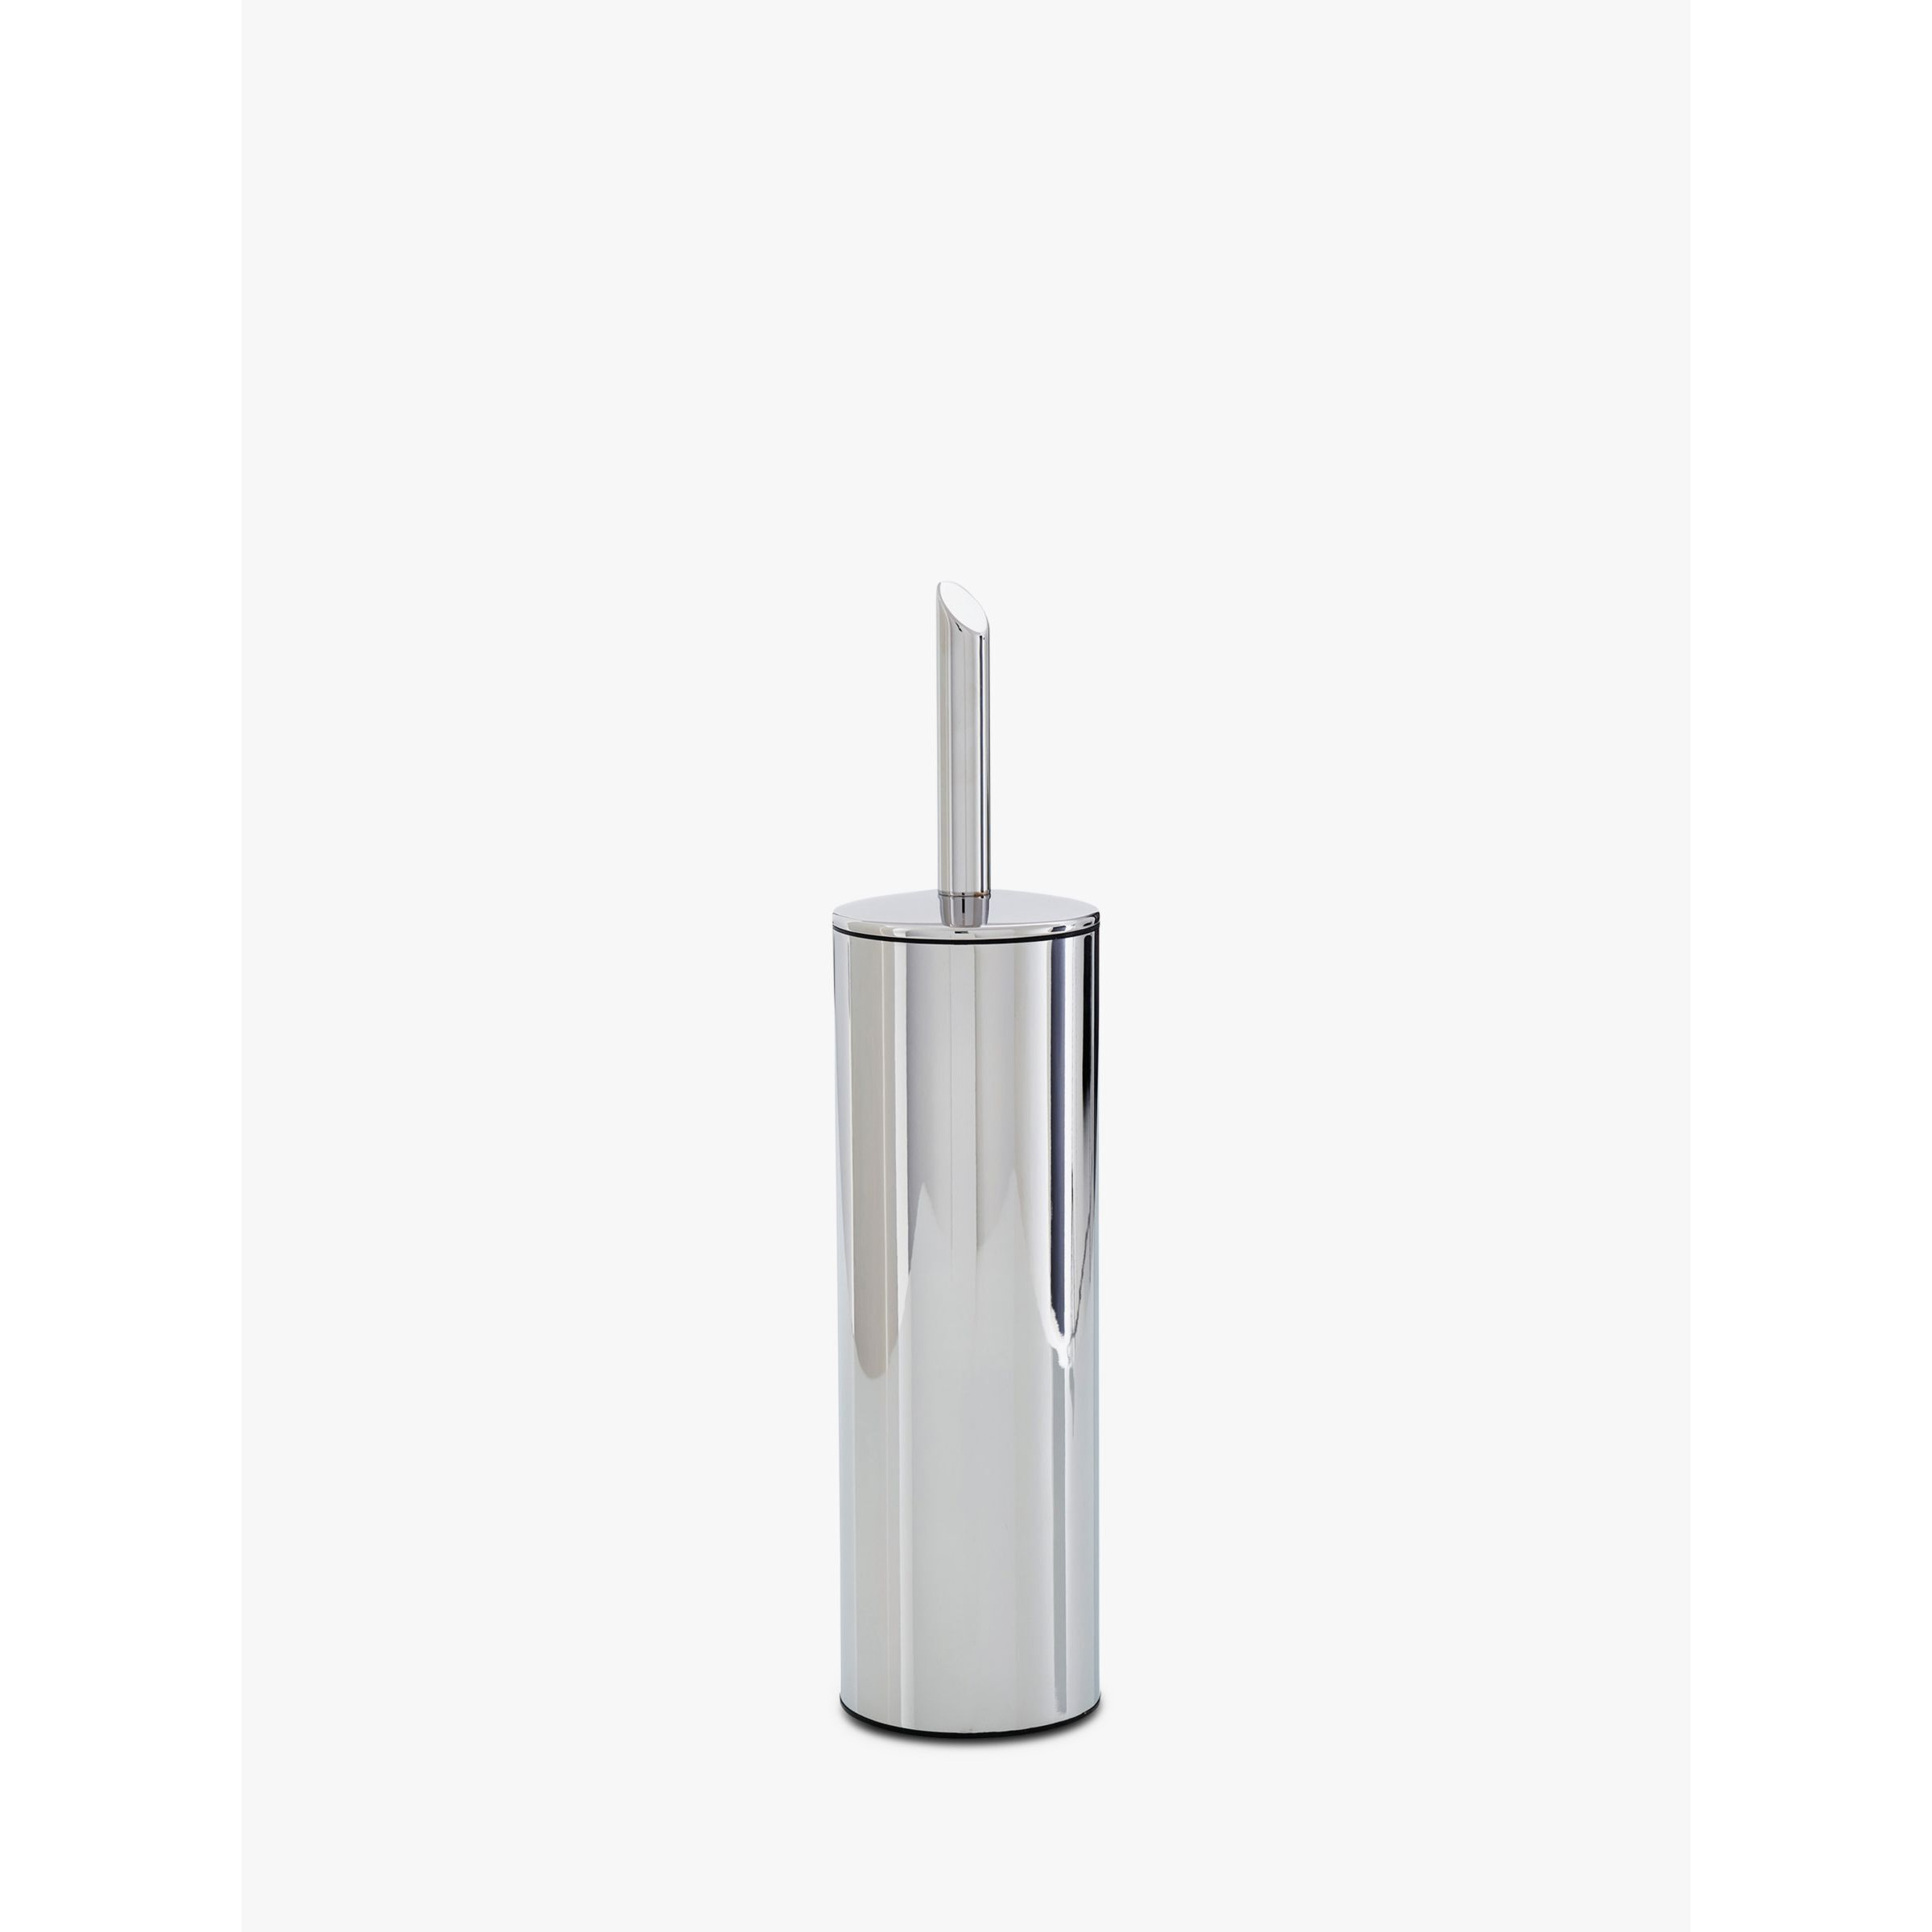 Robert Welch Oblique Toilet Brush and Holder - image 1